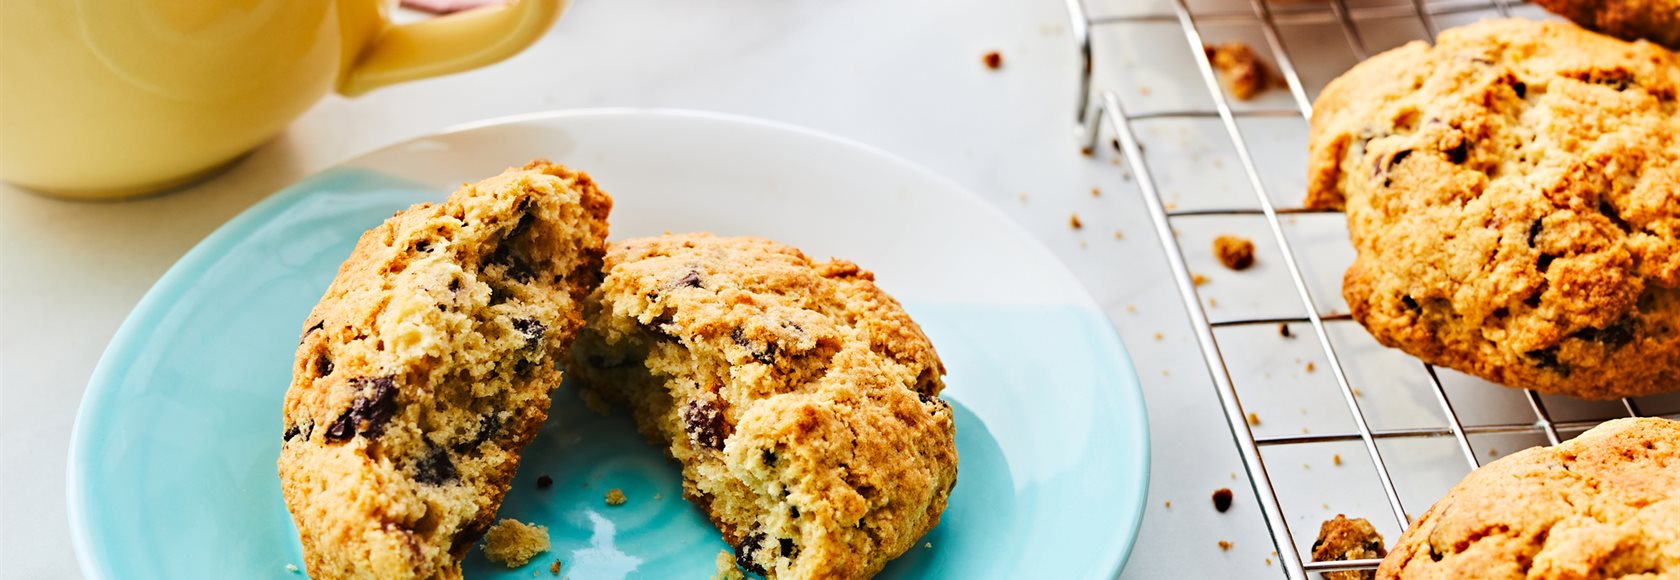 Rock Cakes Recipe | Woolworths